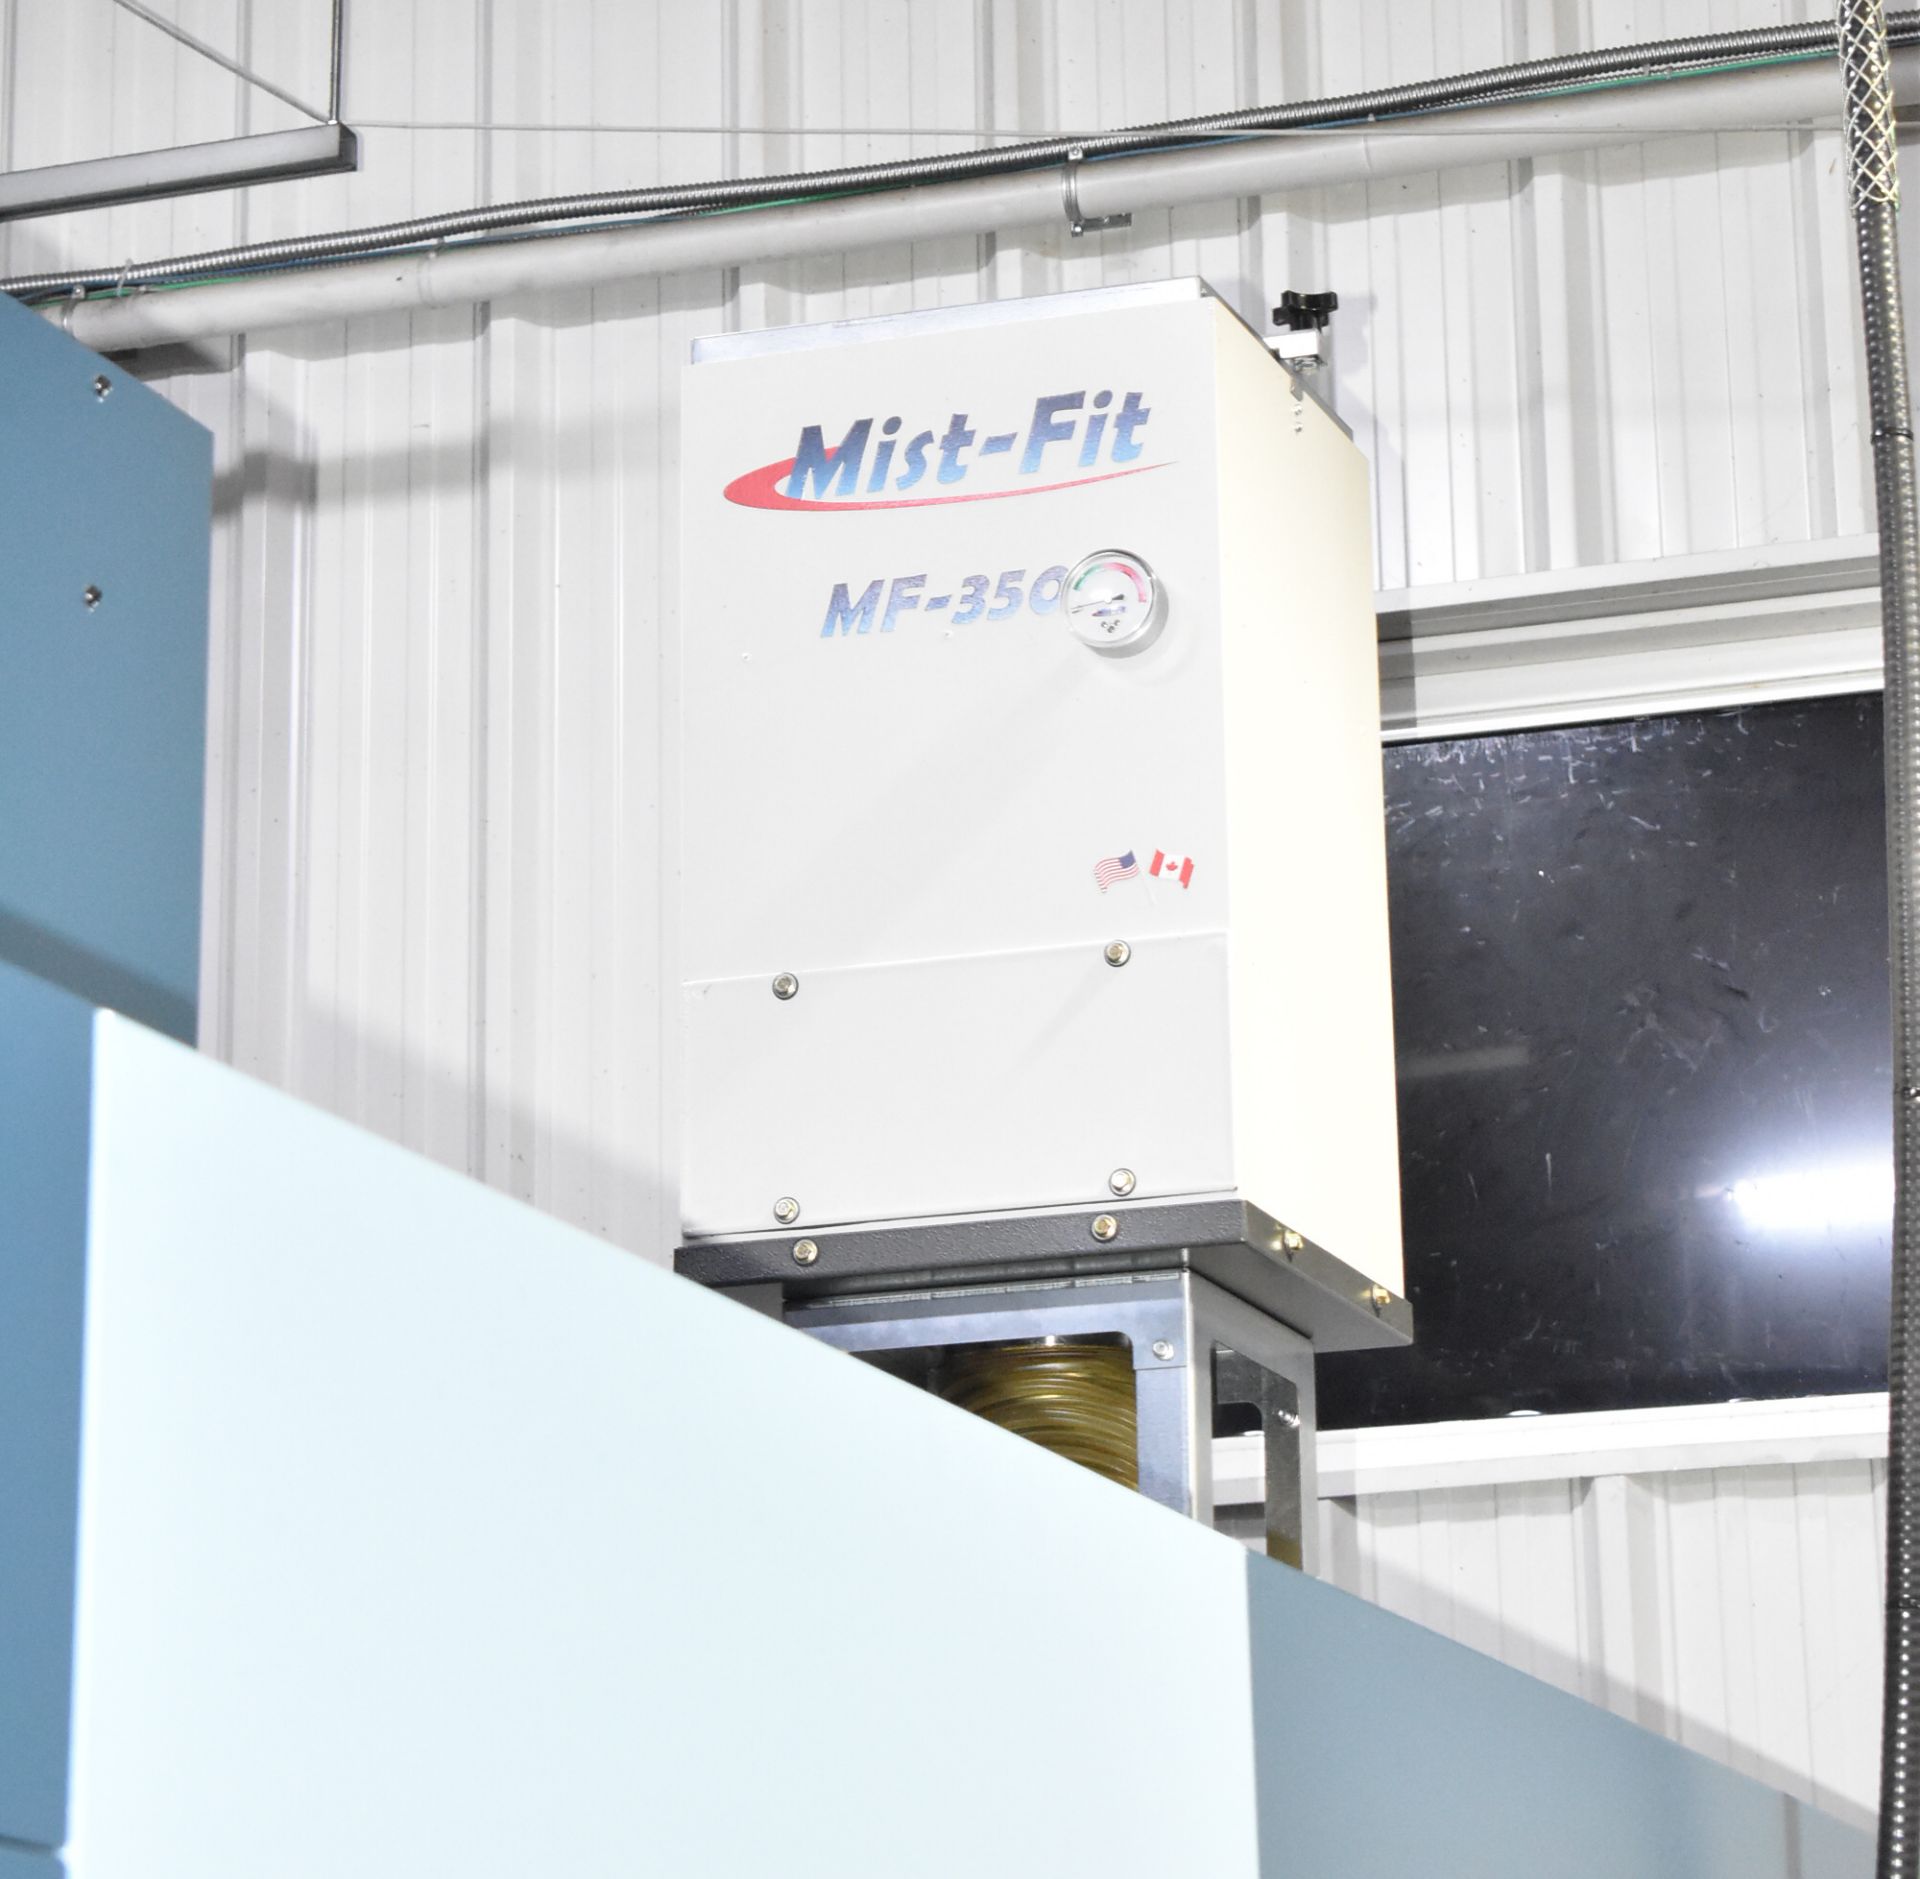 MATSUURA (2019) MX-520 PC4 MULTI-PALLET FULL 5-AXIS HIGH-SPEED CNC VERTICAL MACHINING CENTER WITH - Image 10 of 30